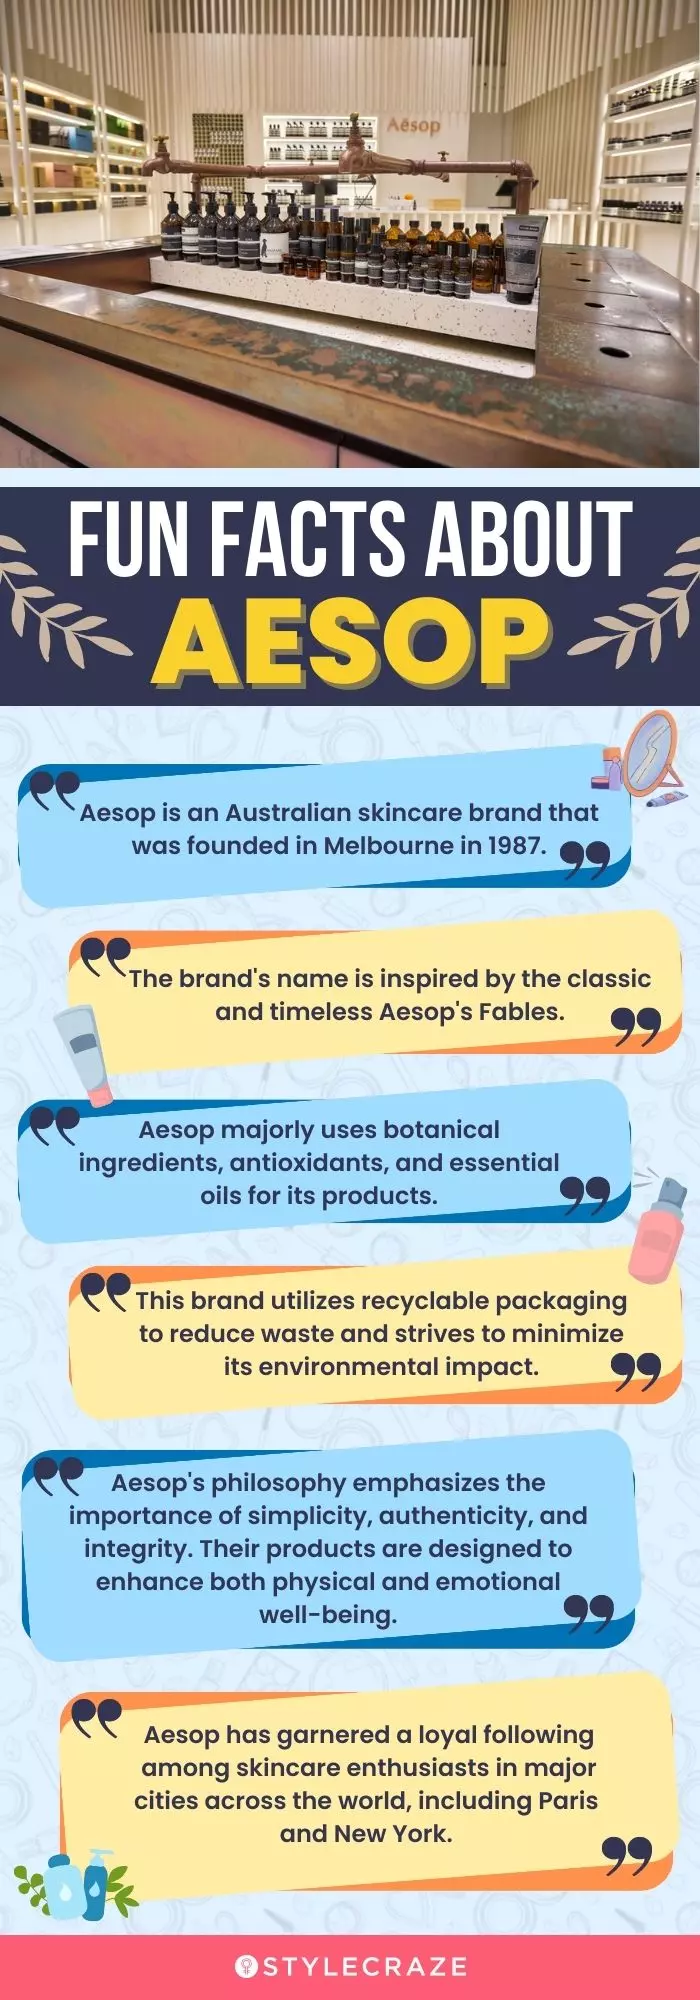 Fun-Facts About Aesop (infographic)